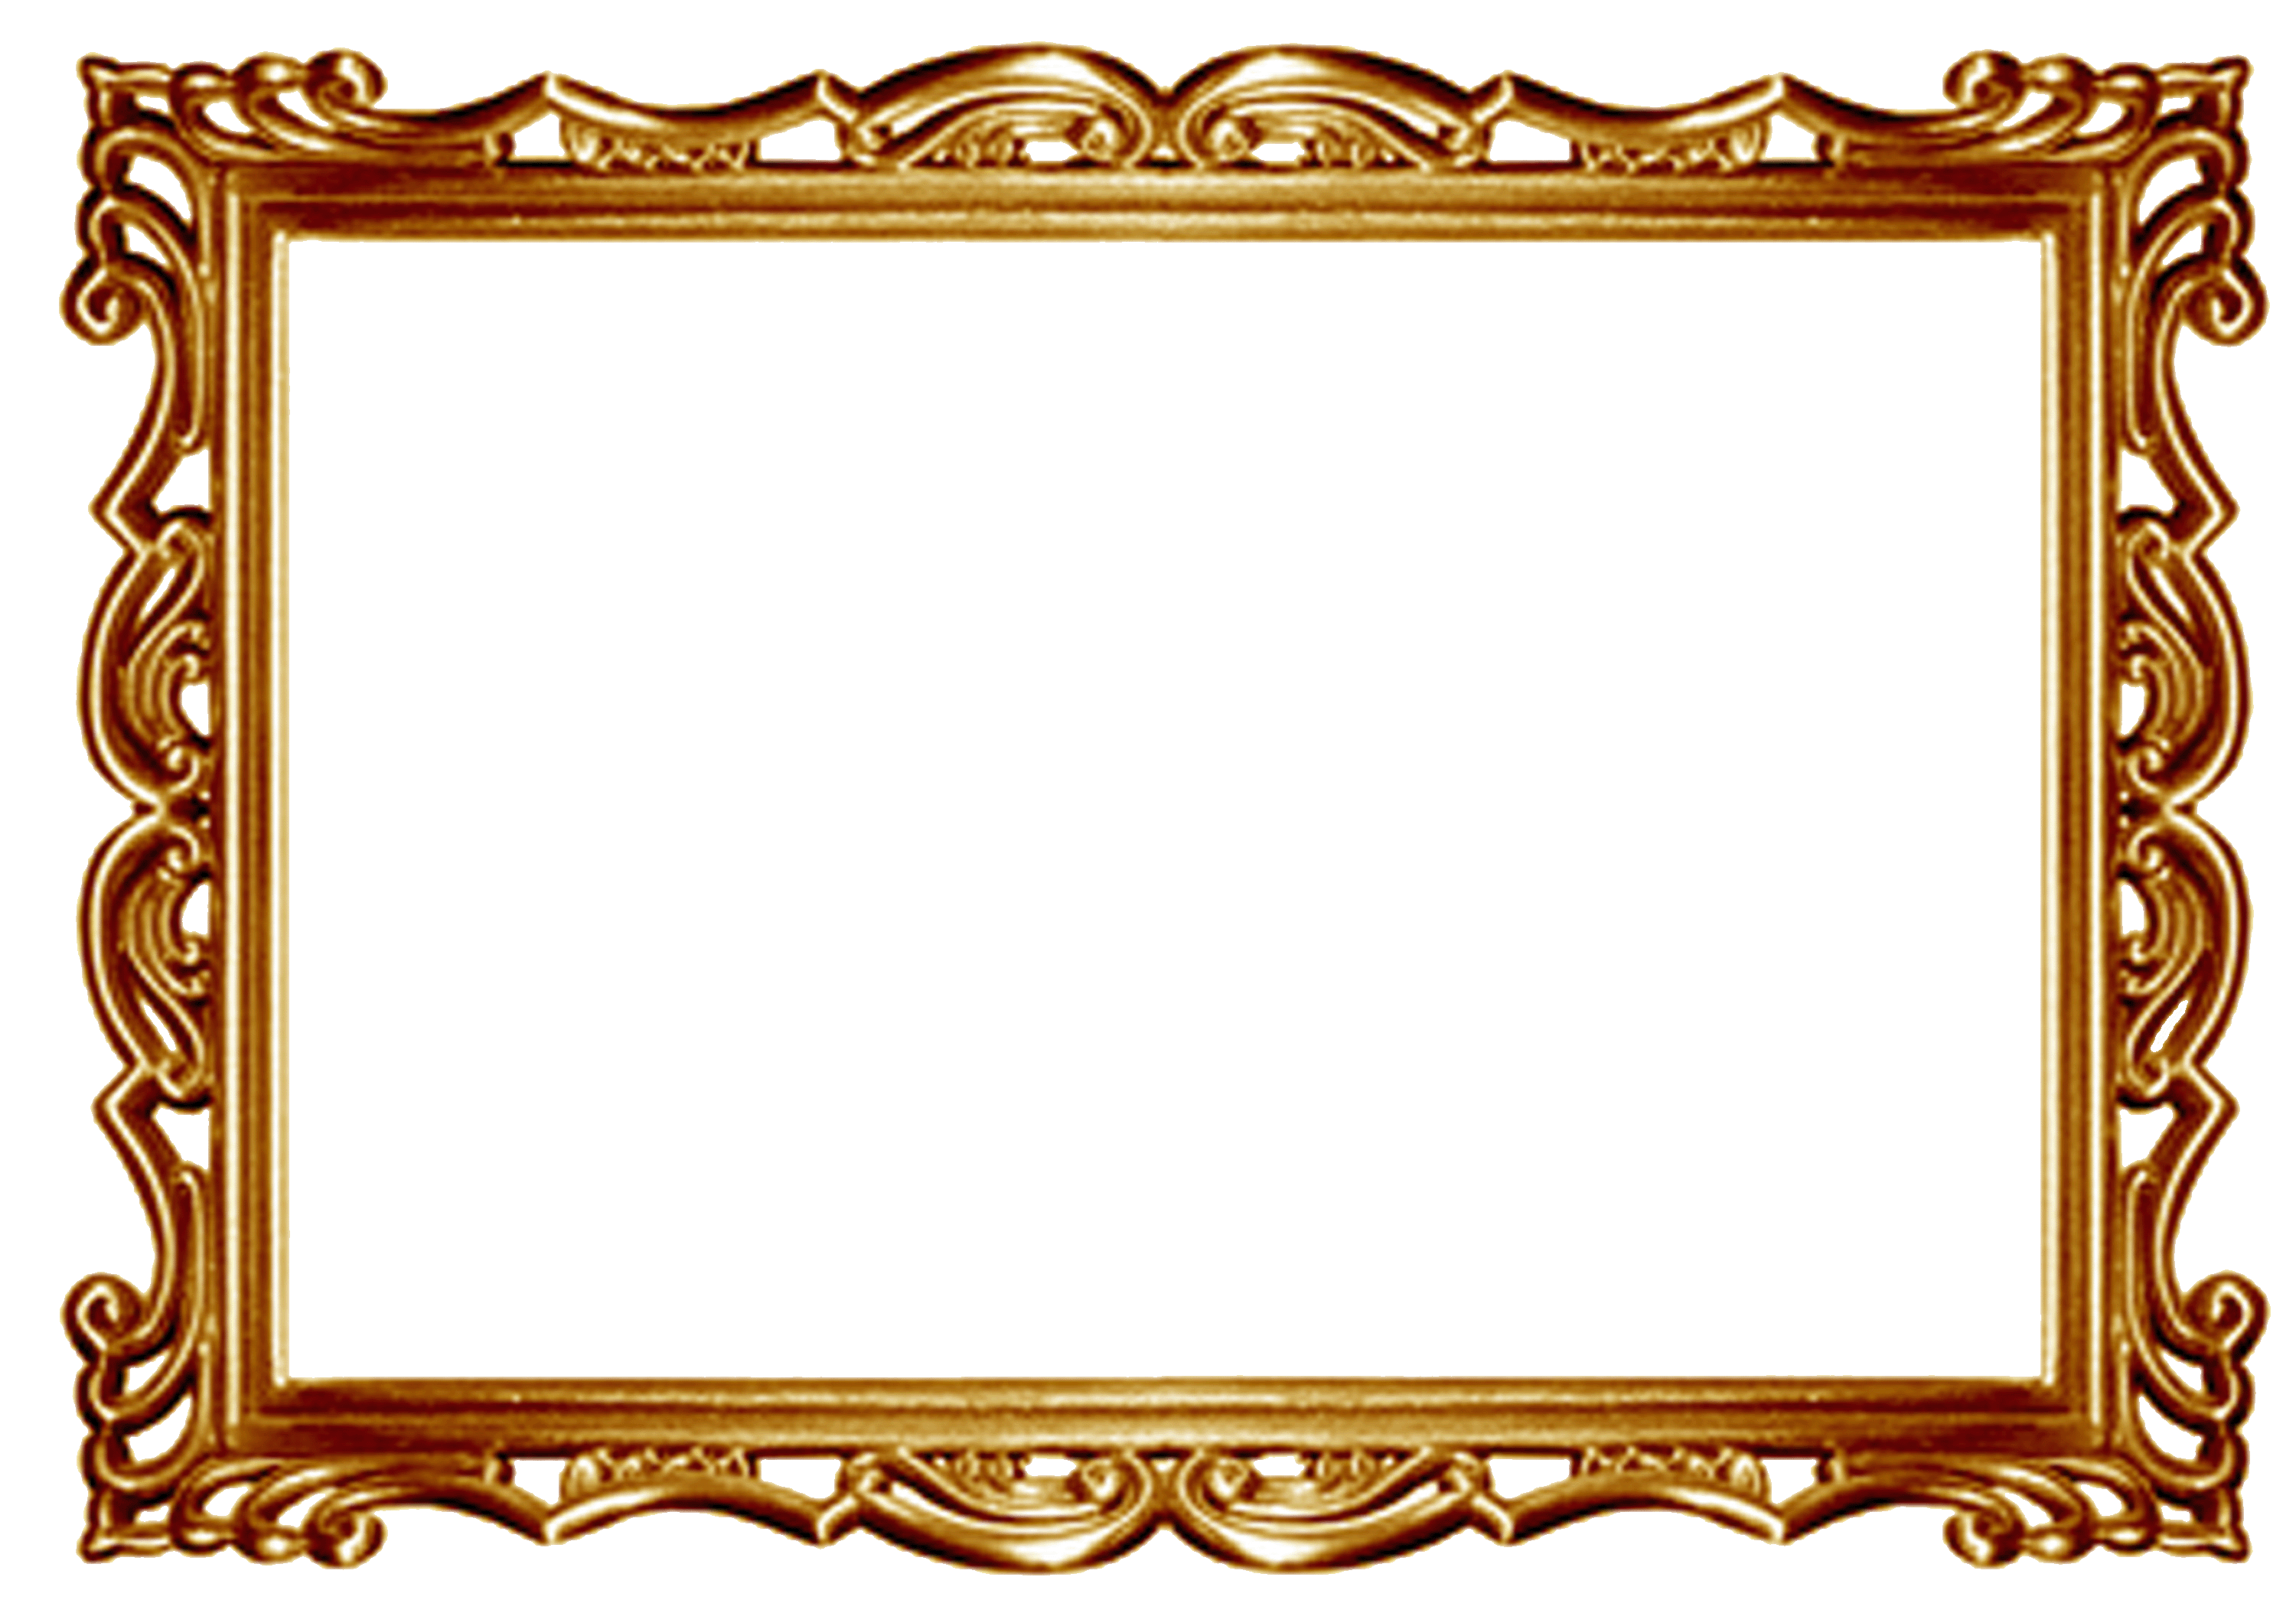 Gold Frame Clip Art - Free Clipart Images